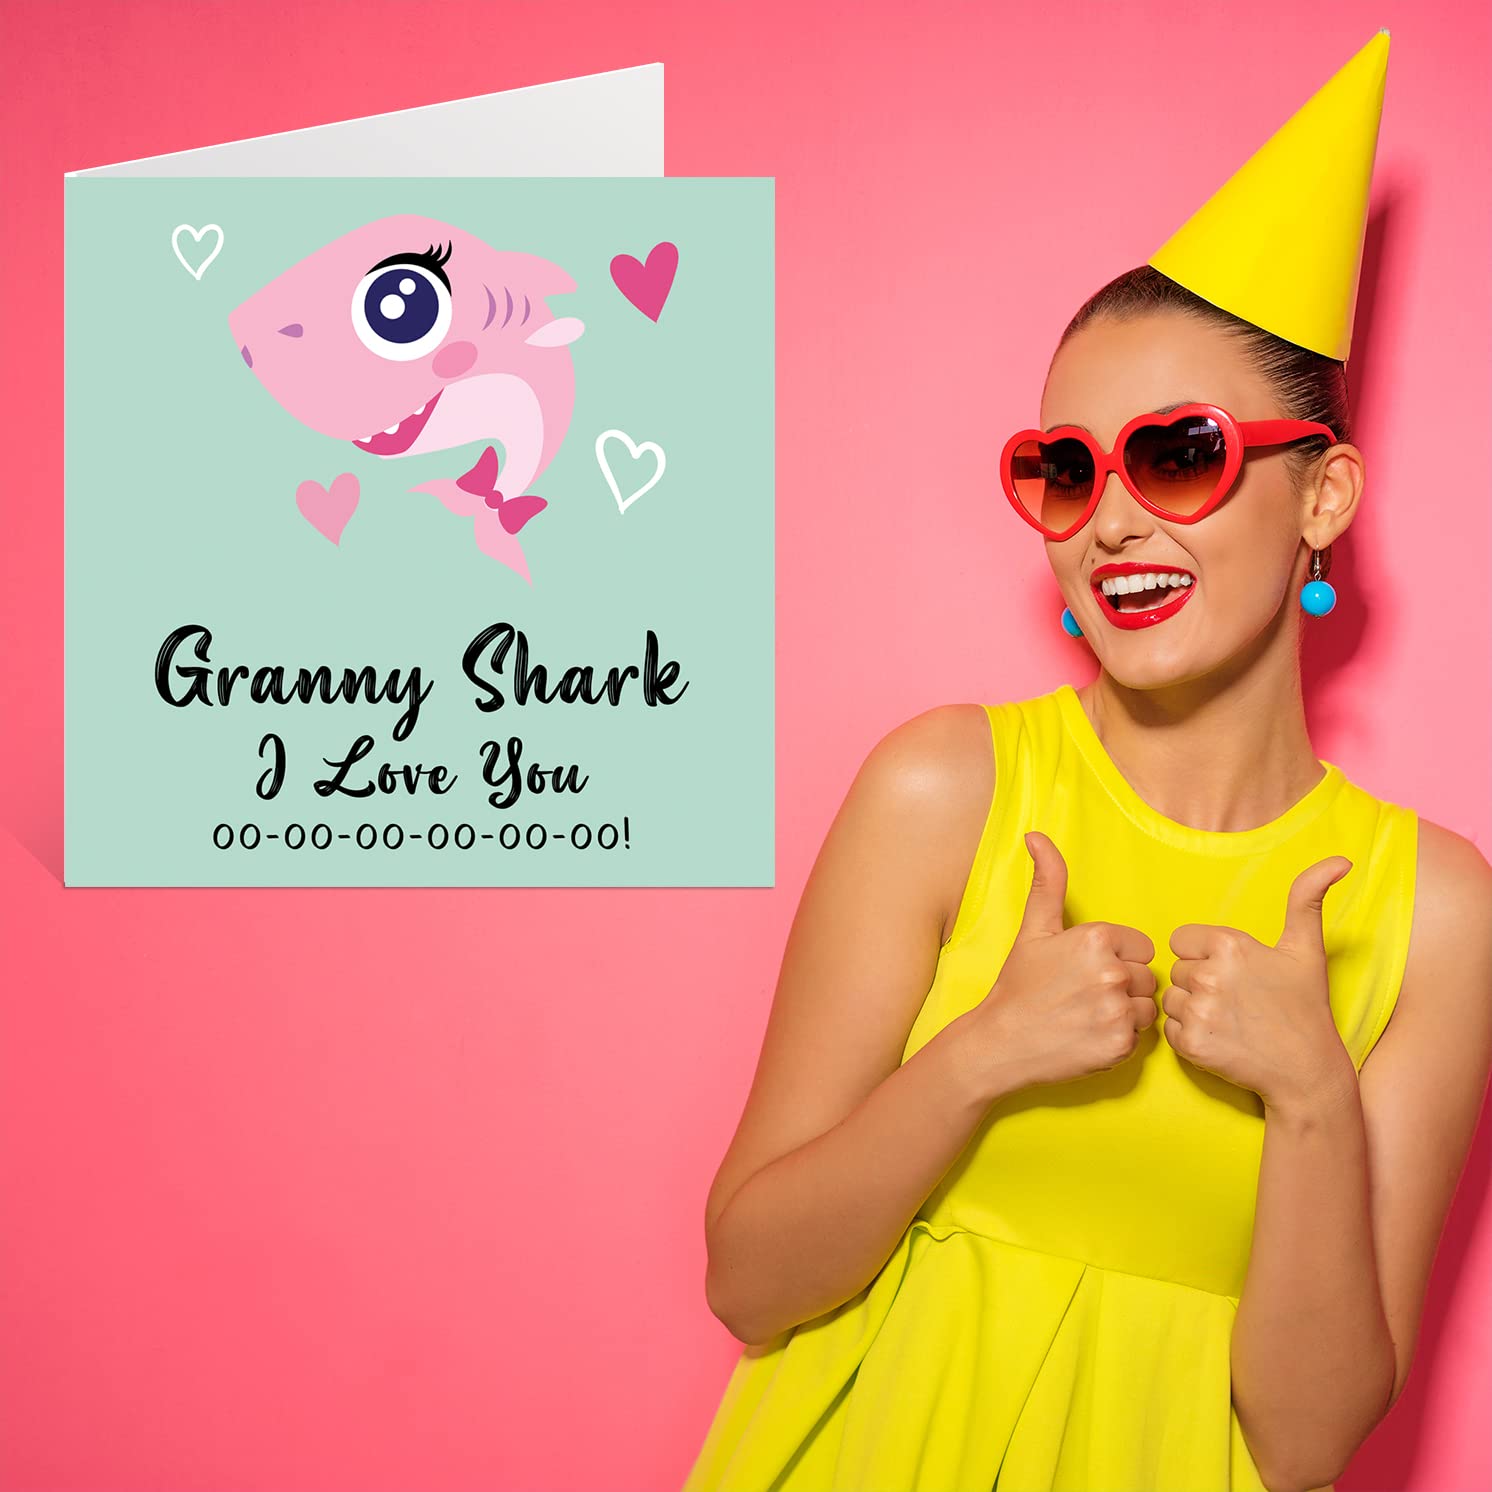 Birthday Cards for Granny - Granny Shark - Granny Mothers Day Card from Granddaughter Grandson, Happy Birthday Granny from Toddler Baby, 145mm x 145mm Seasonal Granny Gran Funny Greeting Cards